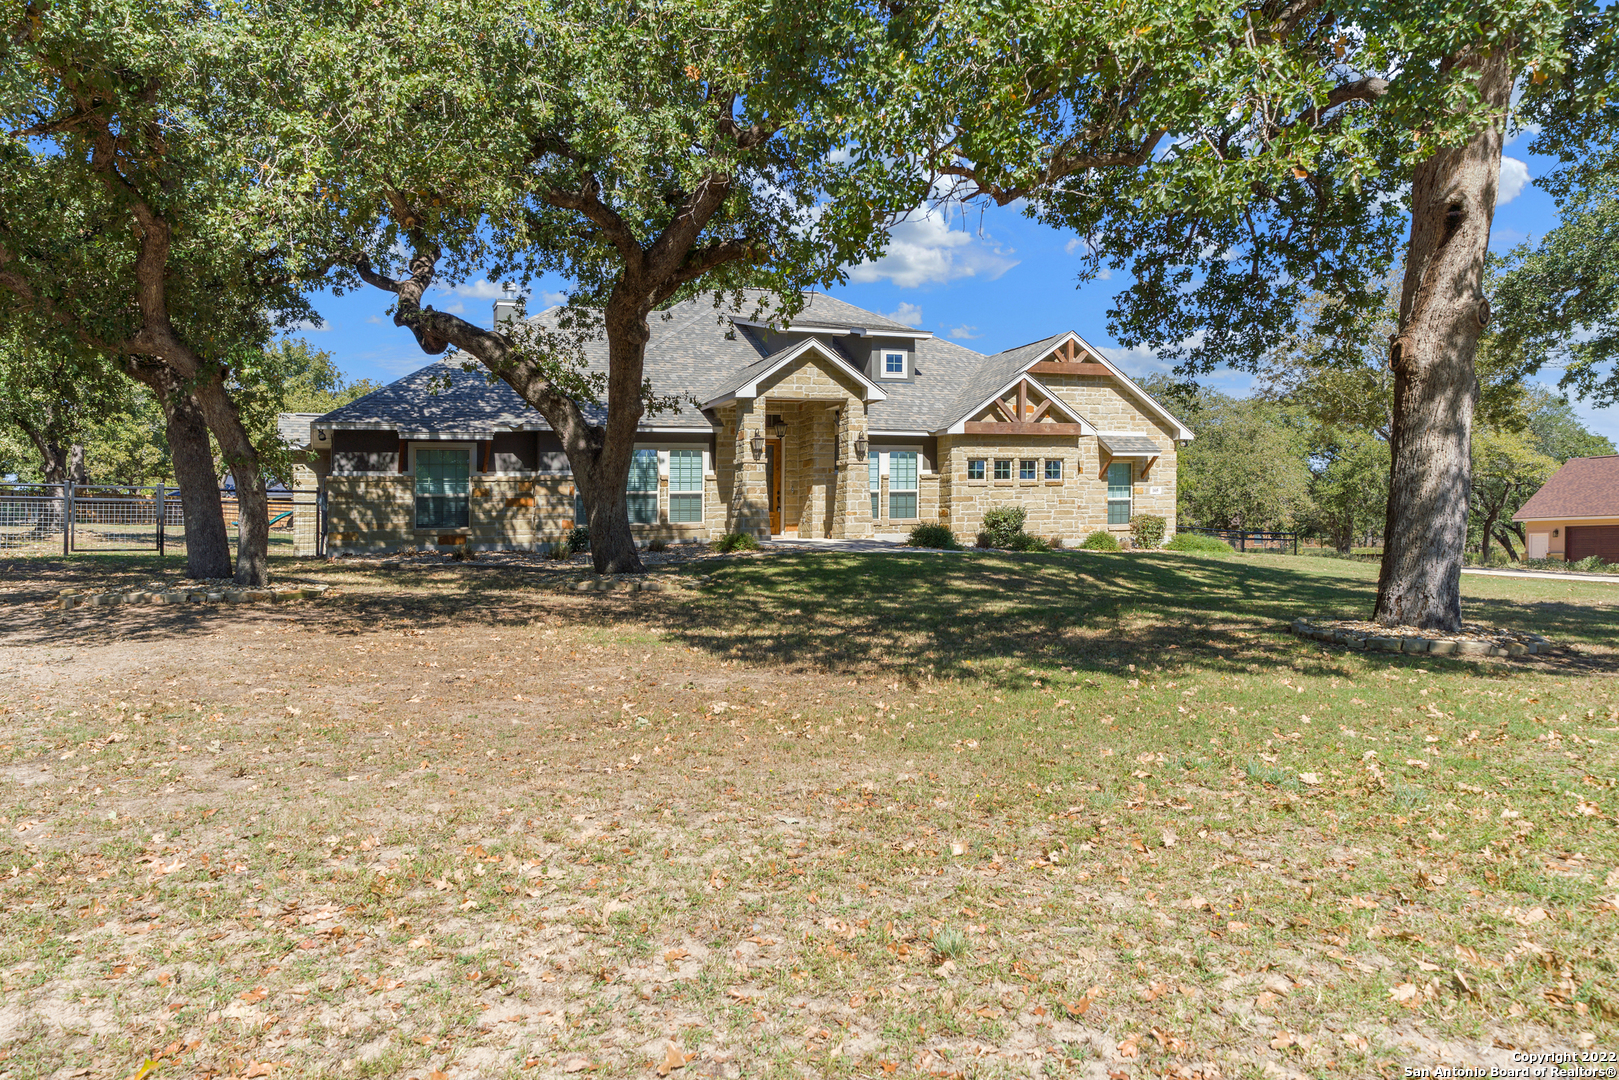 Wow, this beauty has it all! Rustic elegance meets style on 1 acre with a pool! This home was featured on the front cover of HOMES & LAND MAGAZINE in 2019 upon completion of build. Gorgeous Texas hill country home with rock and stucco exterior. This home is meticulous and move in ready. Welcoming front lawn and landscape with extended driveway. The large open floor plan is perfect for entertaining. The interior features wood beams, abundant natural light, a stunning rock fireplace, and the mesquite mantel is local artisan crafted. The kitchen features leathered granite, custom 'antiqued' cabinetry, marble tile backsplash and SS appliances. Master bedroom has beautiful cedar ceiling beams and a spacious master bath. Come enjoy the backyard oasis featuring the recently installed Bode in-ground pool with adjoining hot tub, a recently installed covered gazebo w/electricity off the pool for those summer BBQs and for additional seating. Professional rock and landscaping throughout backyard including sprinkler system and a new metal fence. Large covered back patio. Located on a cul-de sac street. This place truly has it all. Contact us today for more info or to schedule a showing!